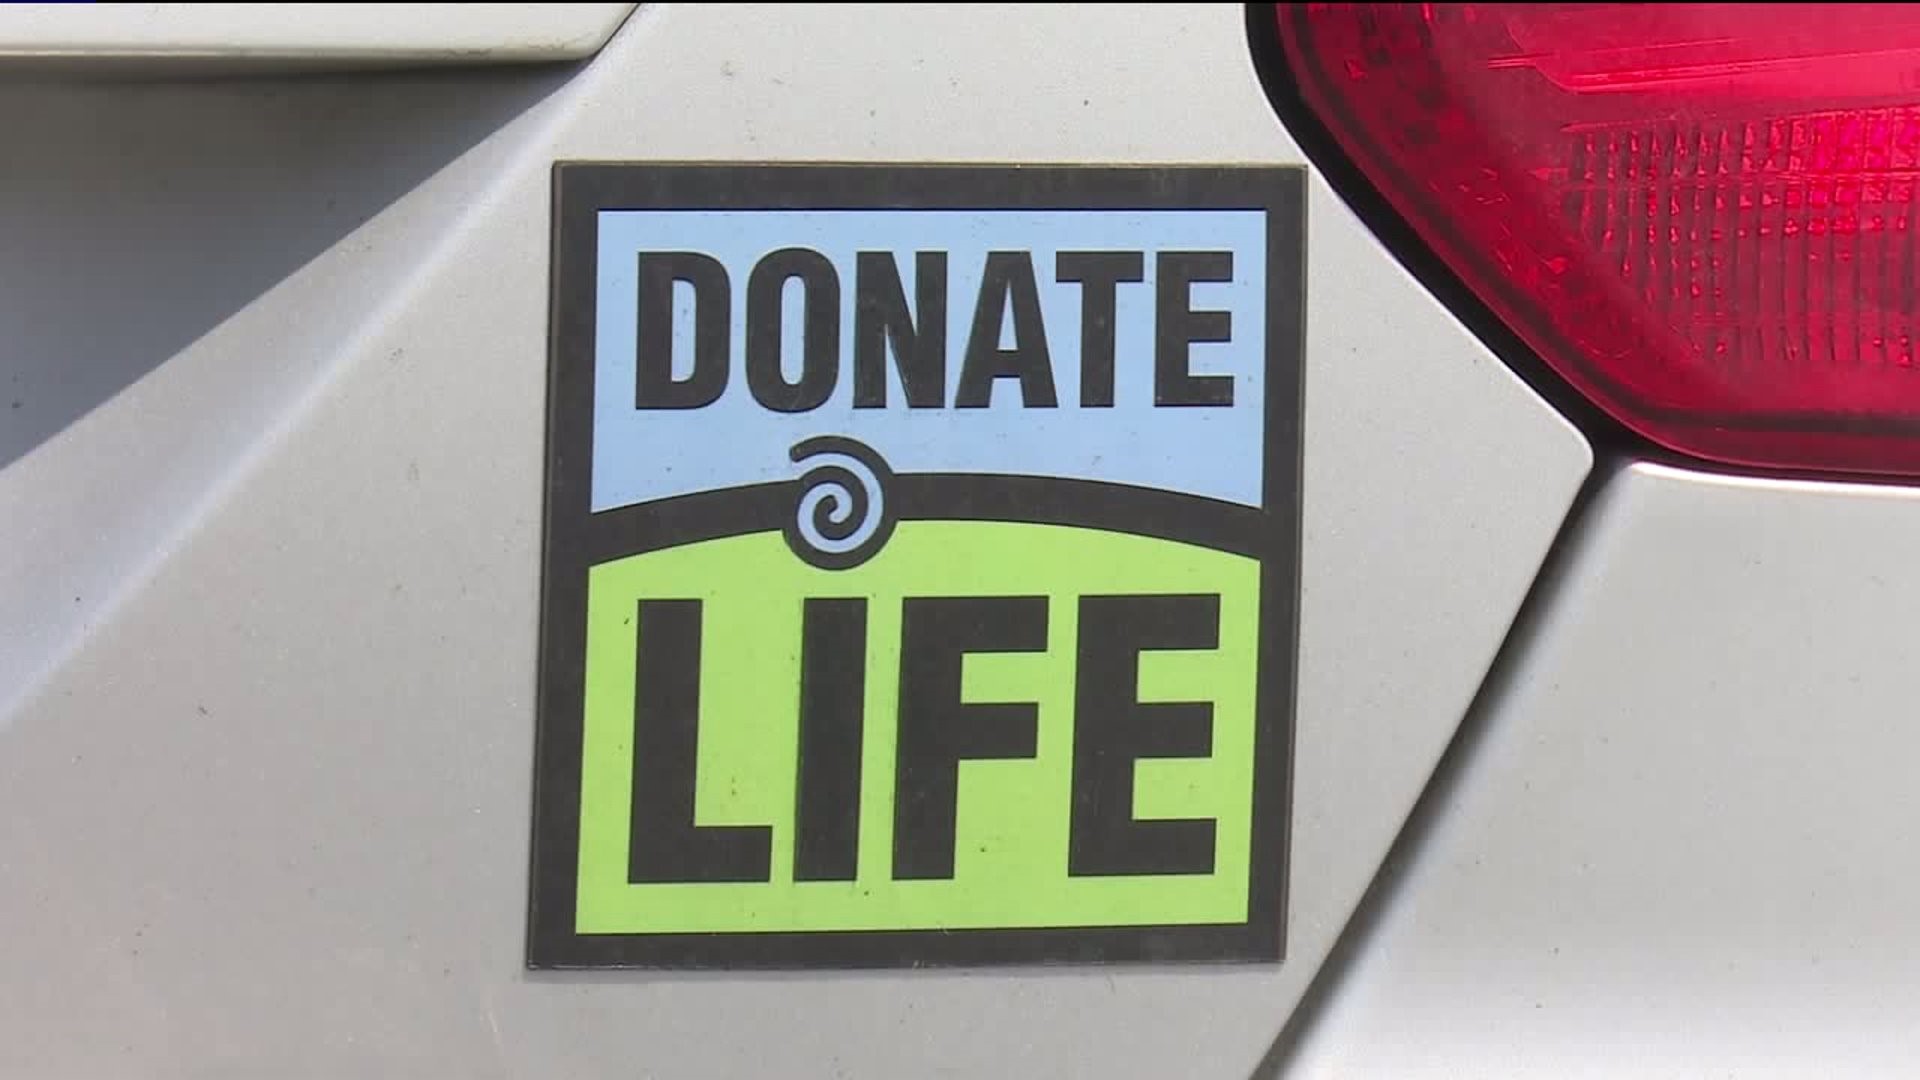 April is Donate Life Month